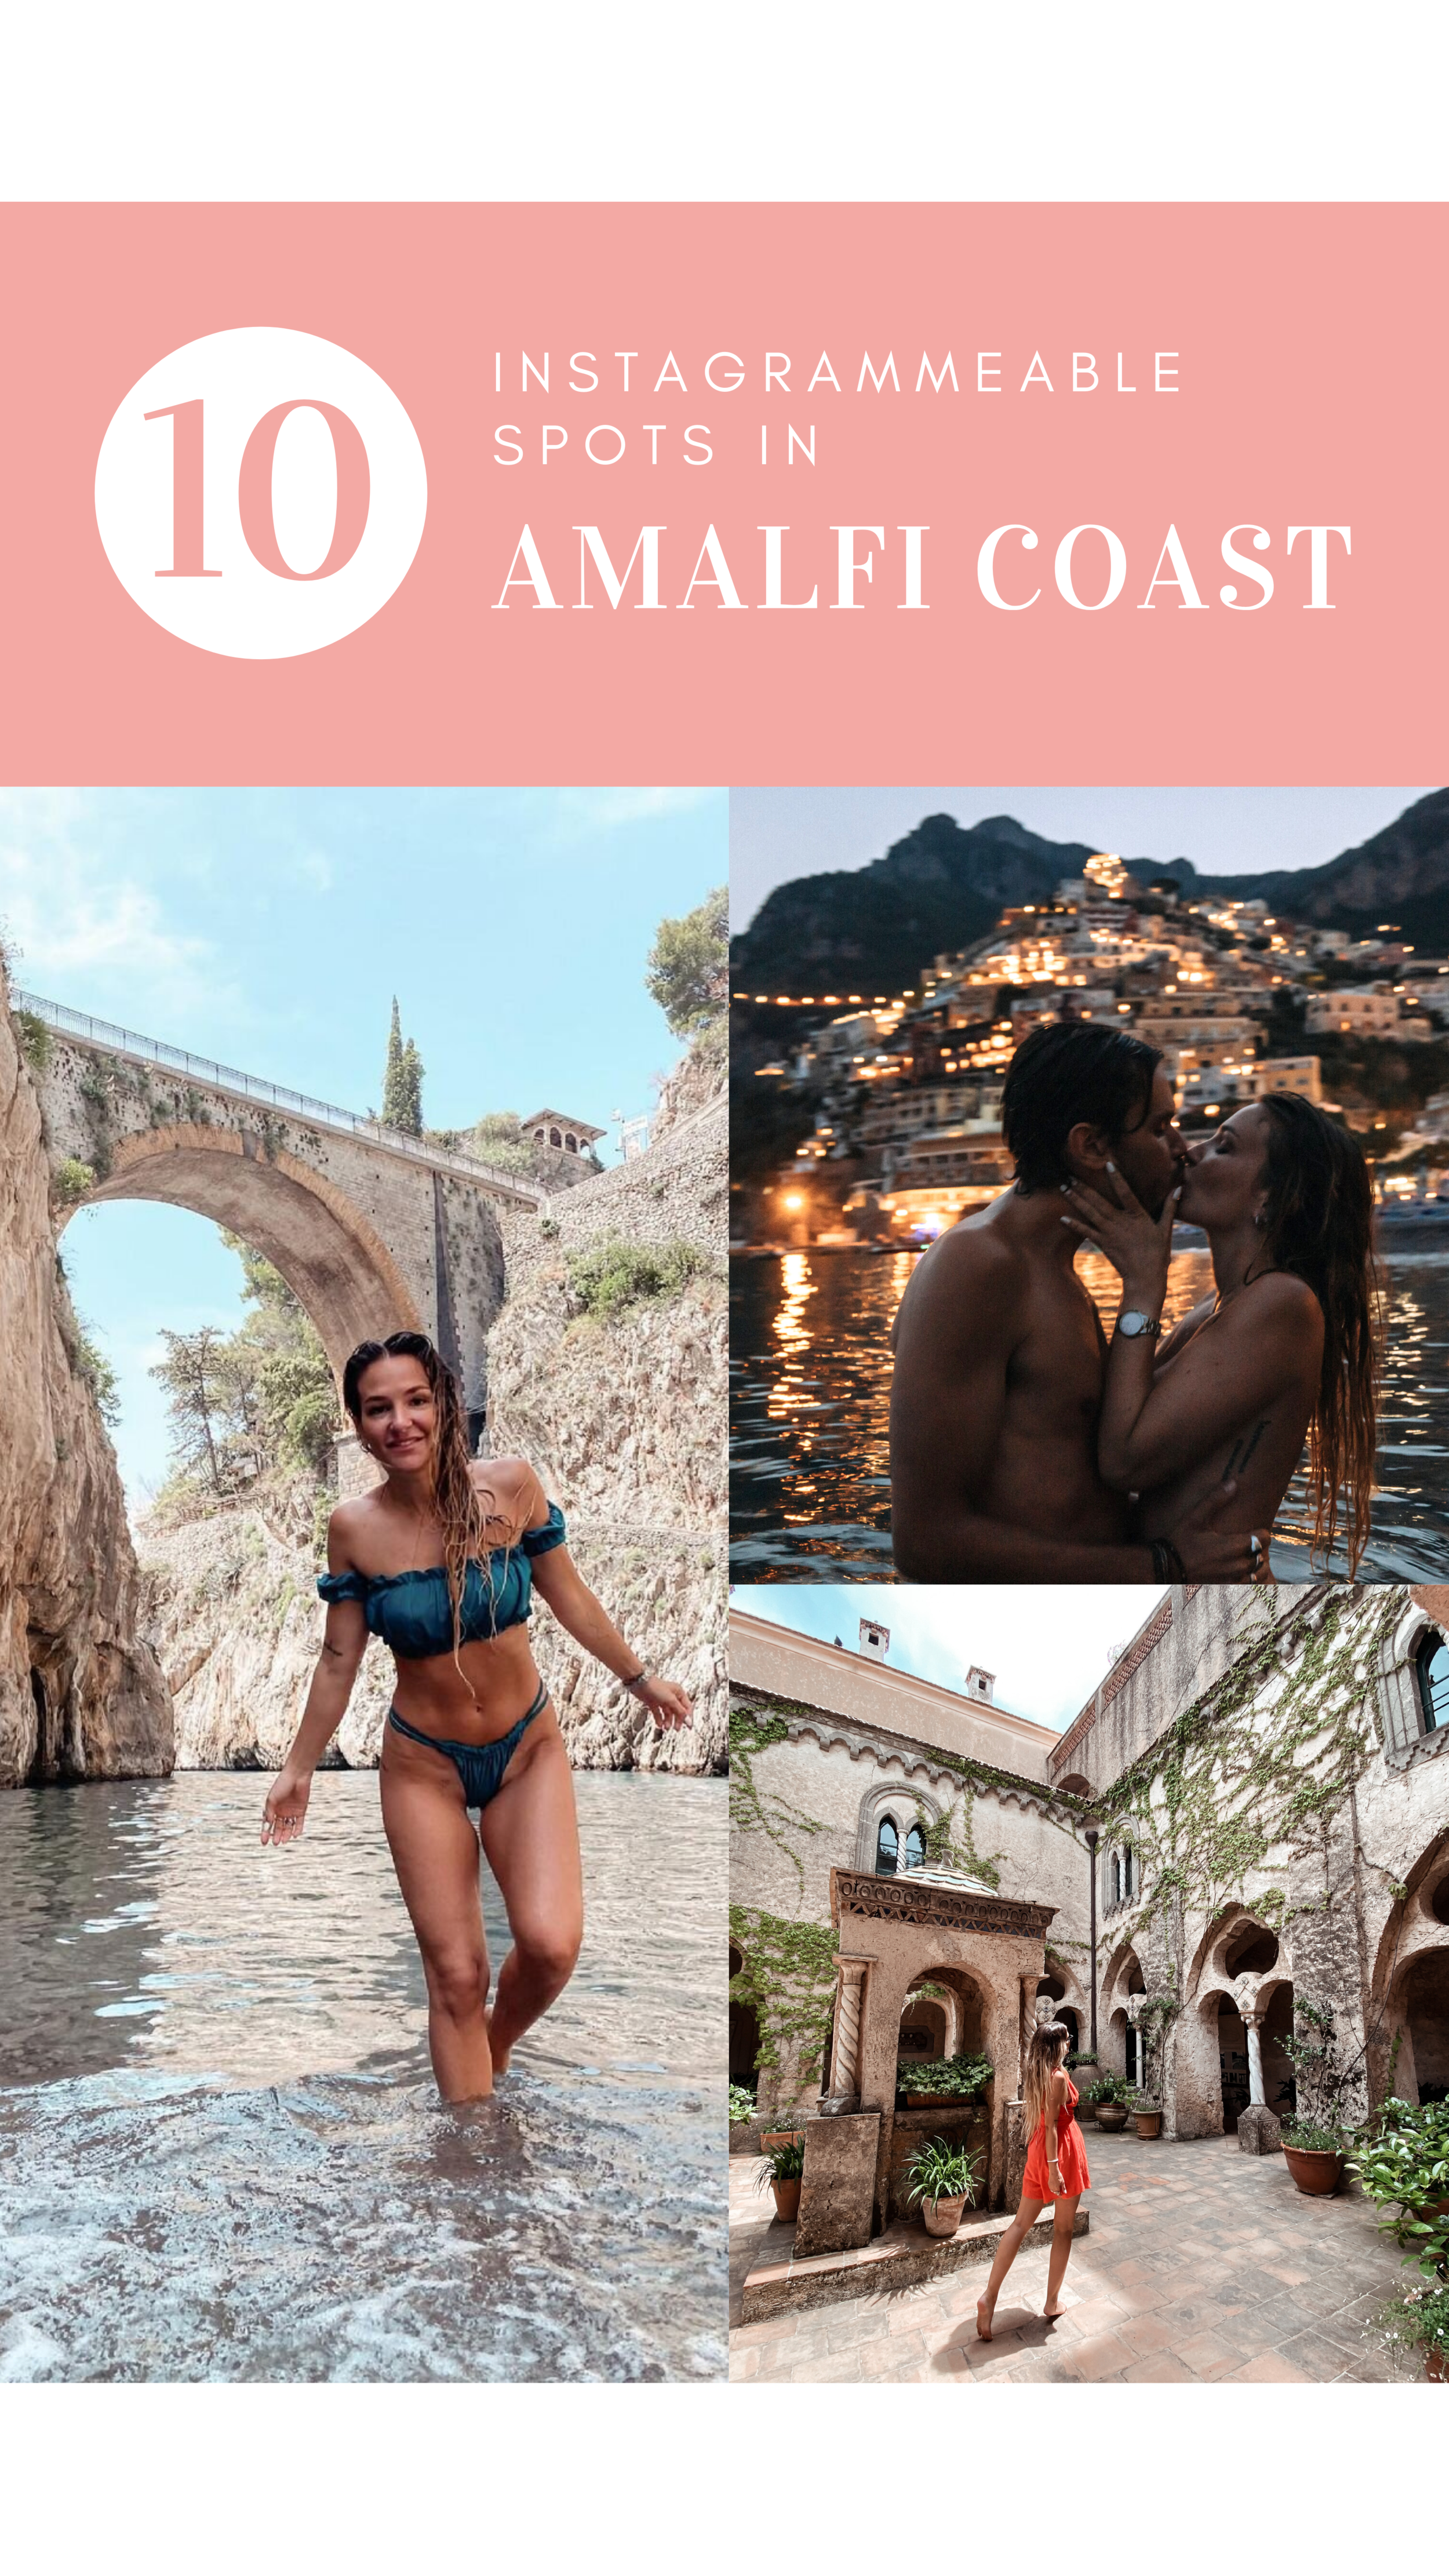 INSTAGRAMMEABLE SPOTS IN AMALFI COAST.png